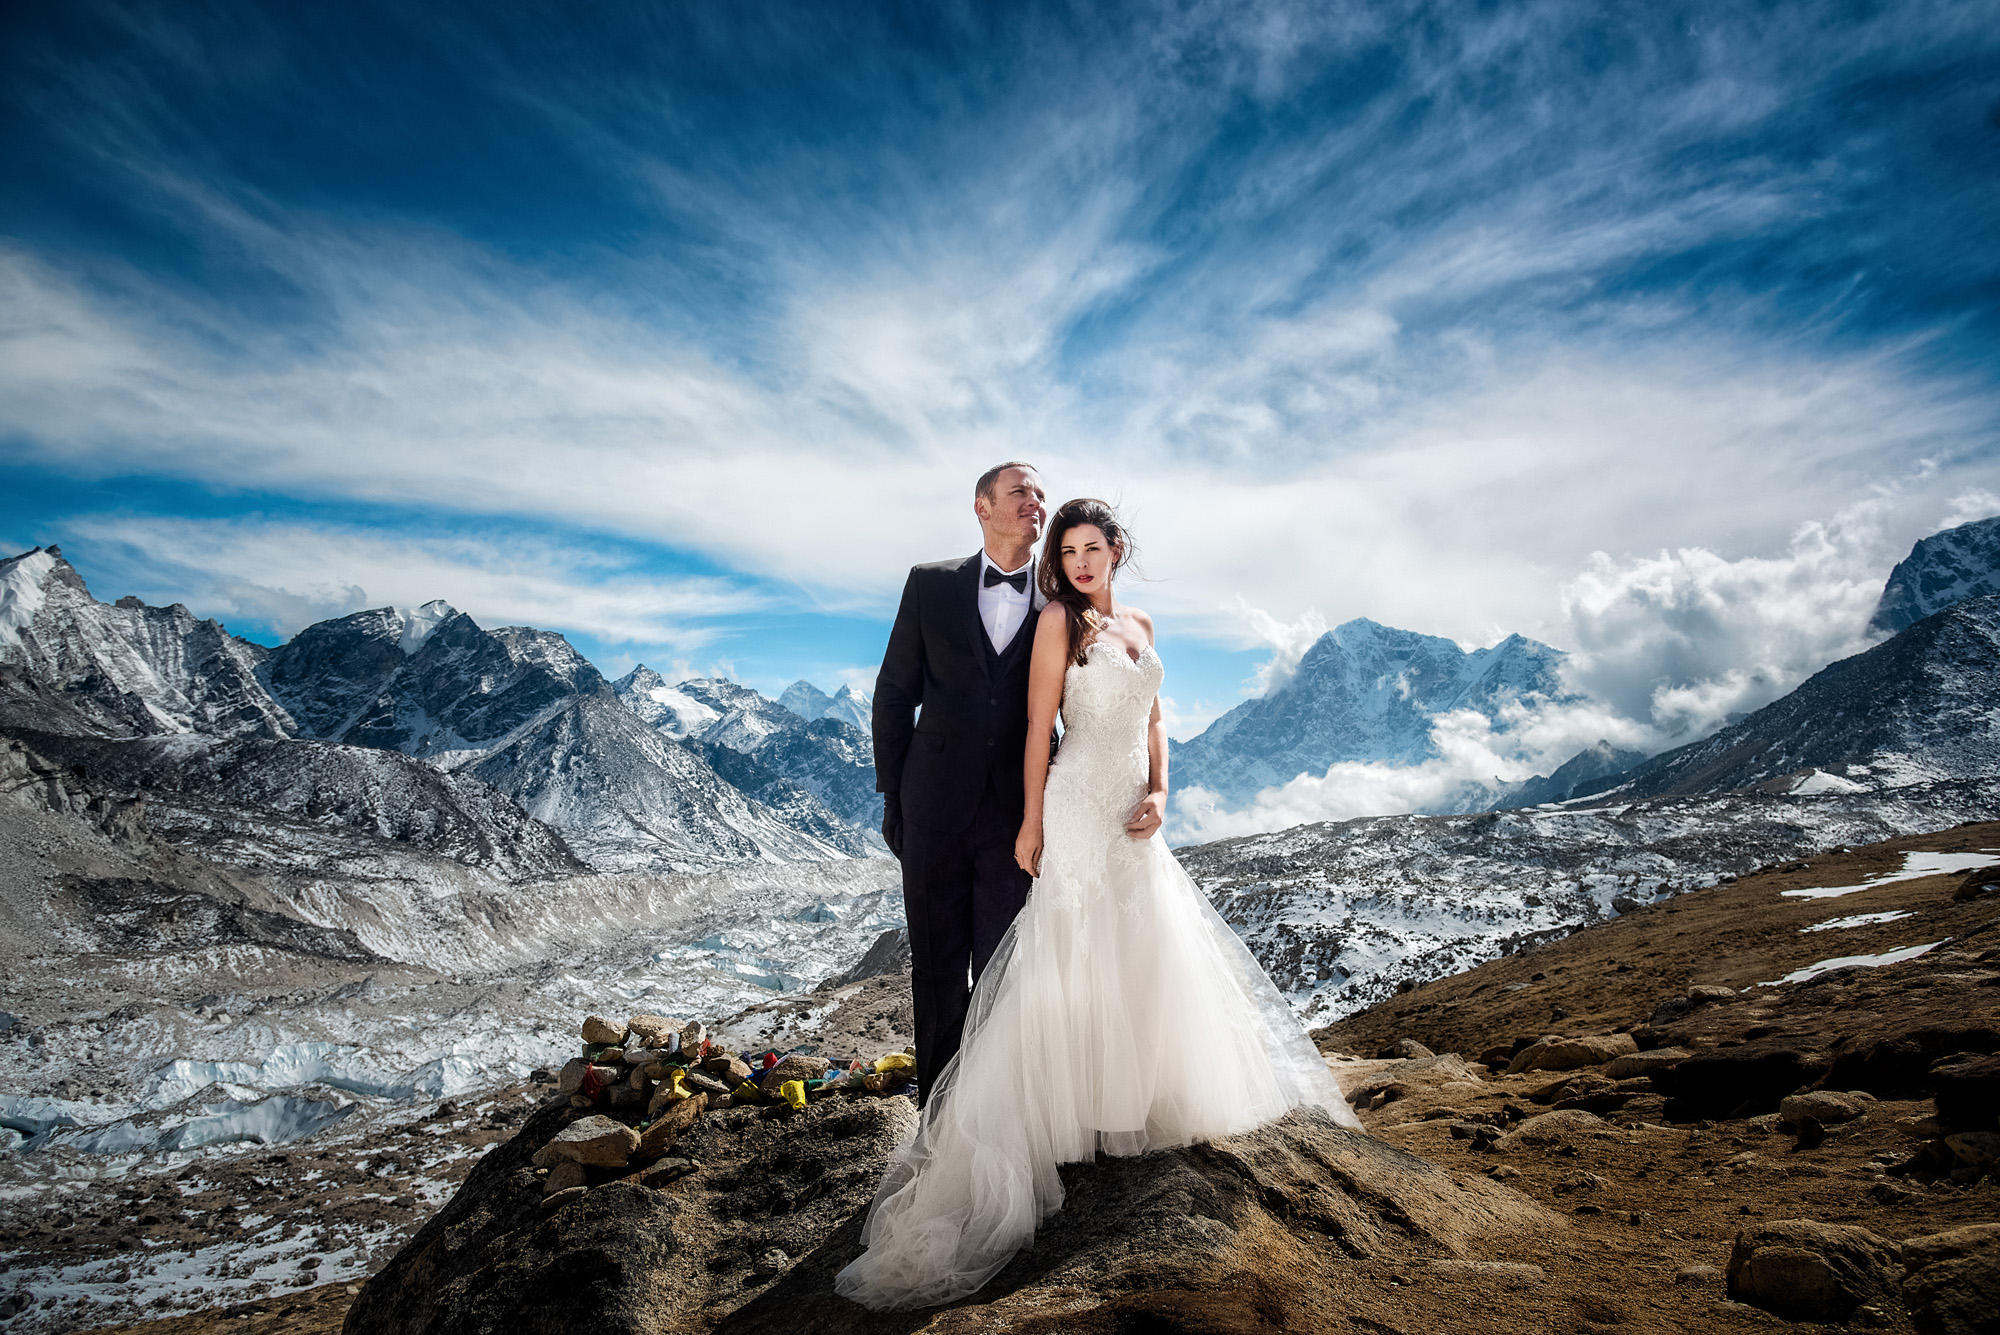 This Couple Just Got Married On Mt Everest And The Photos Are